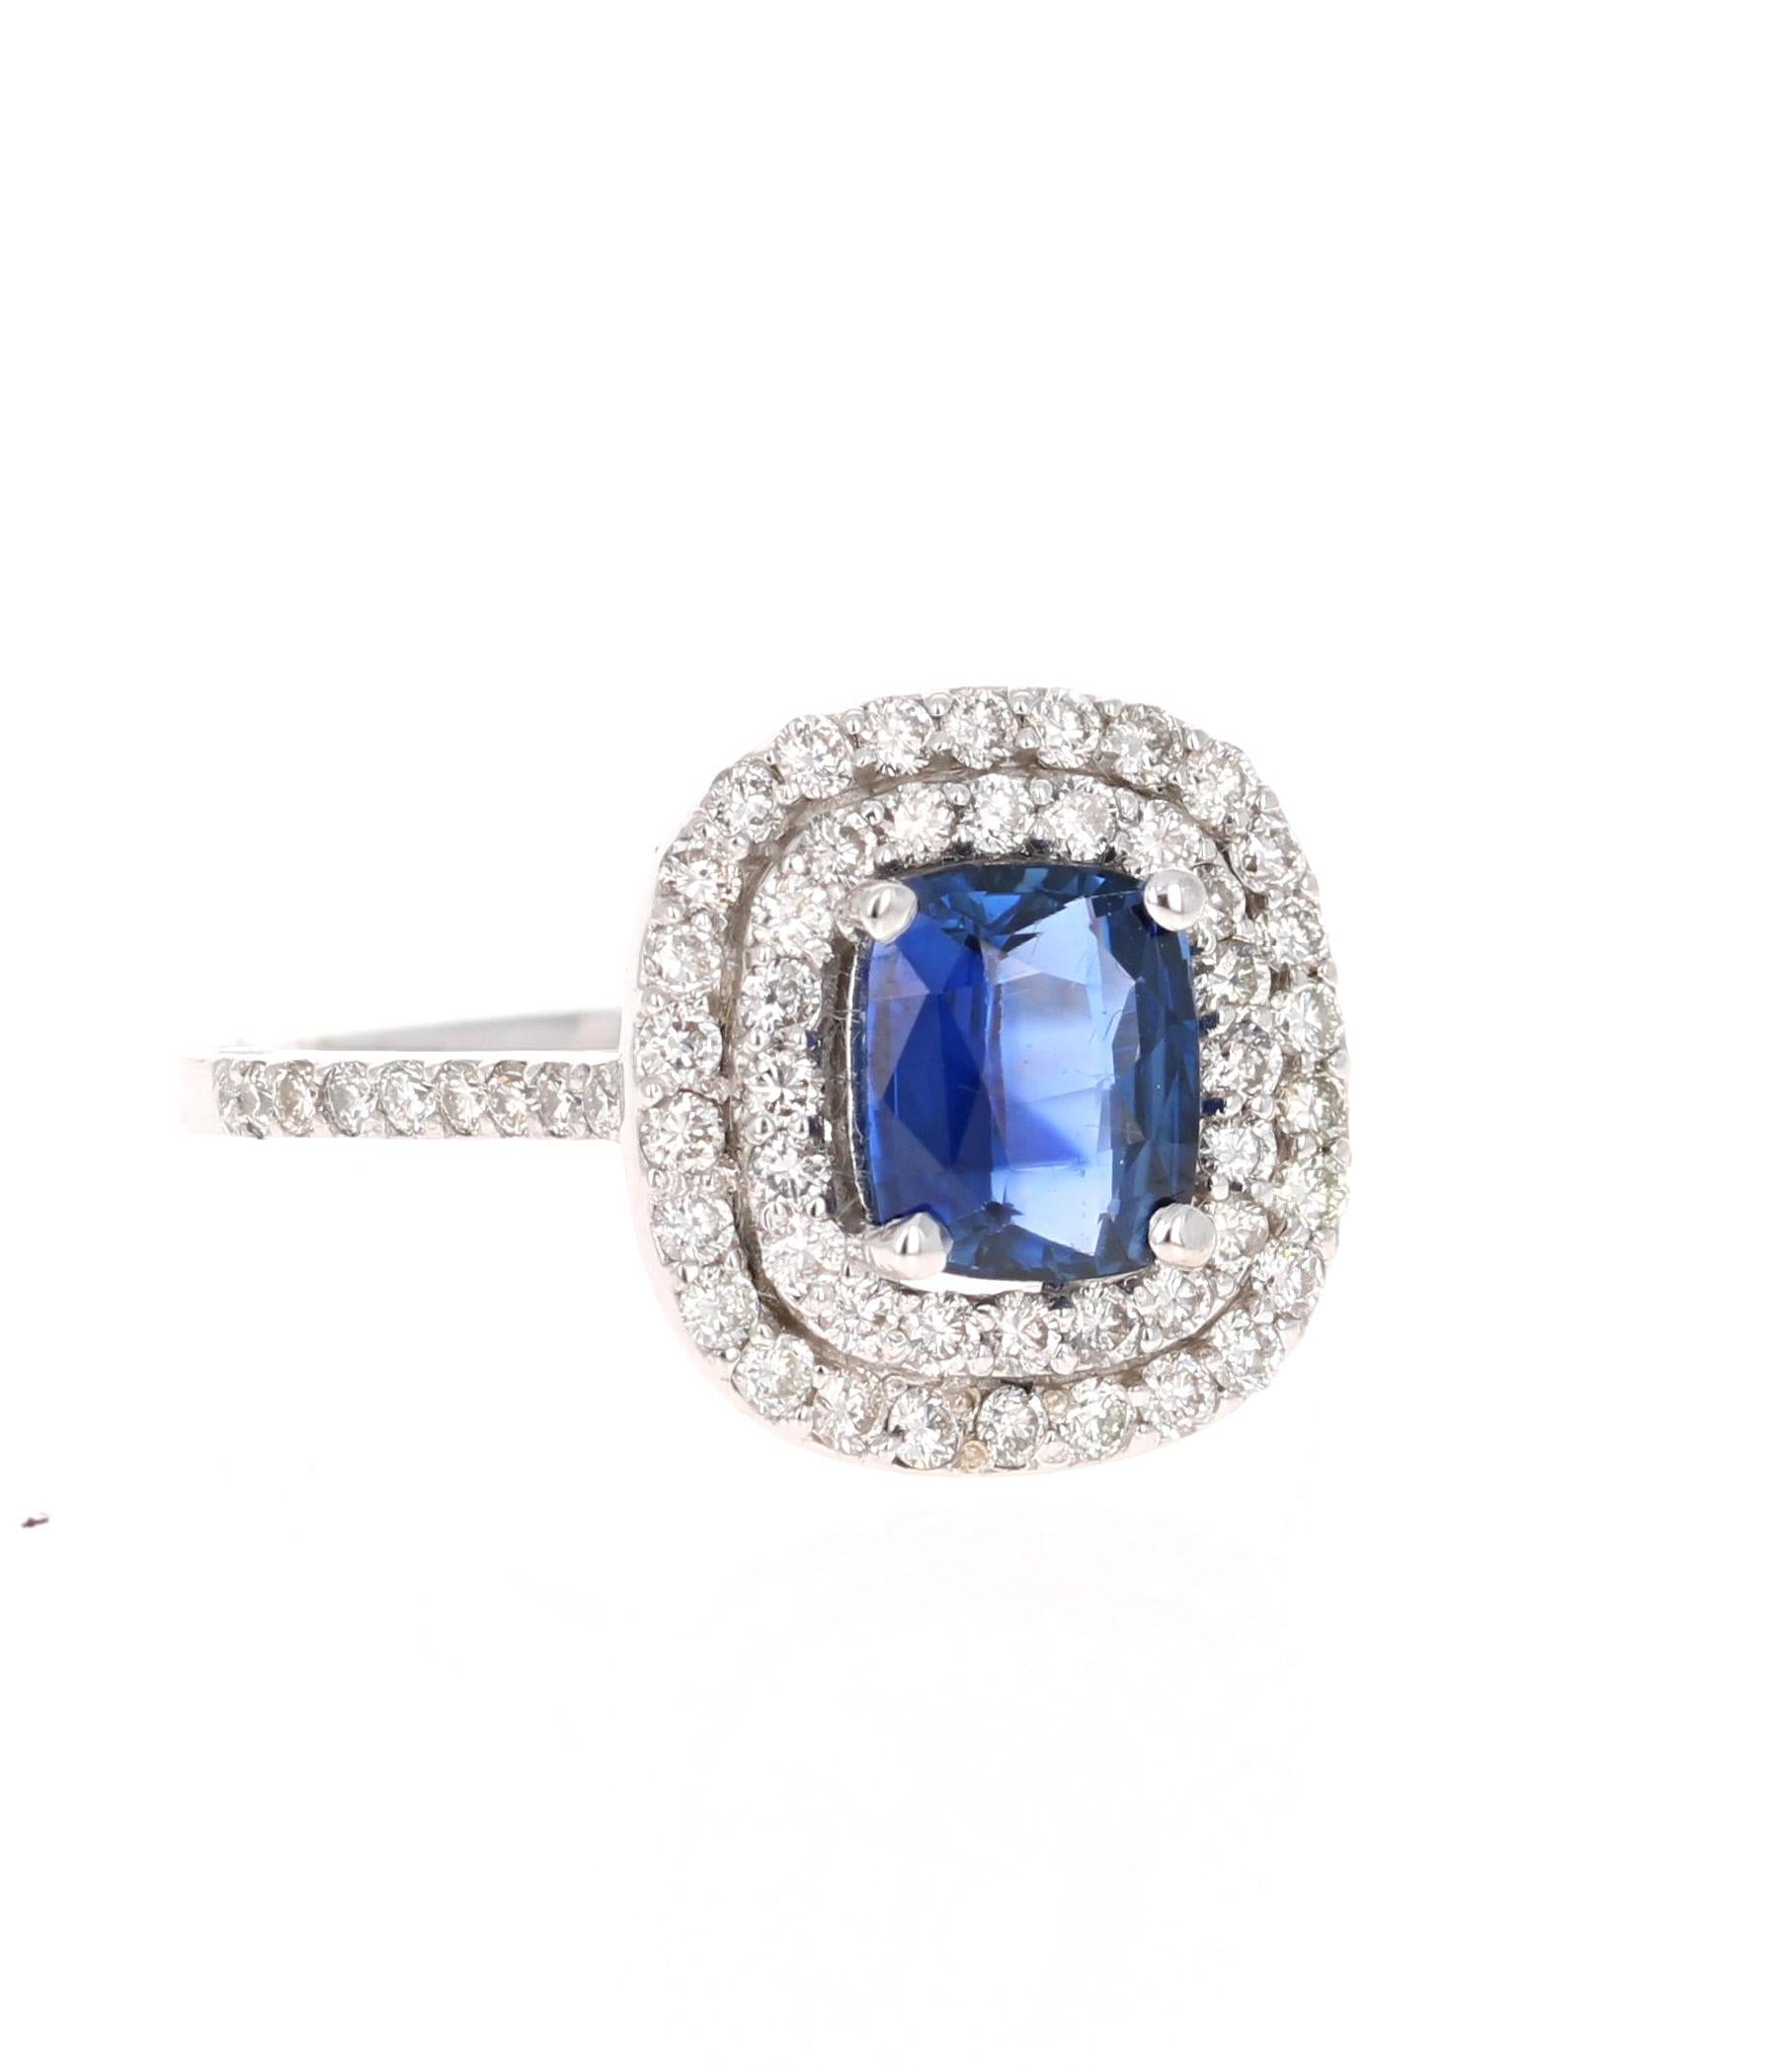 Stunning alternative to a regular diamond engagement ring! 

This blazing blue sapphire ring has a Oval Cushion Cut 1.51 Carat Blue Sapphire and is surrounded by a double halo of 62 Round Cut Diamonds that weigh 0.78 Carats. The clarity and color of